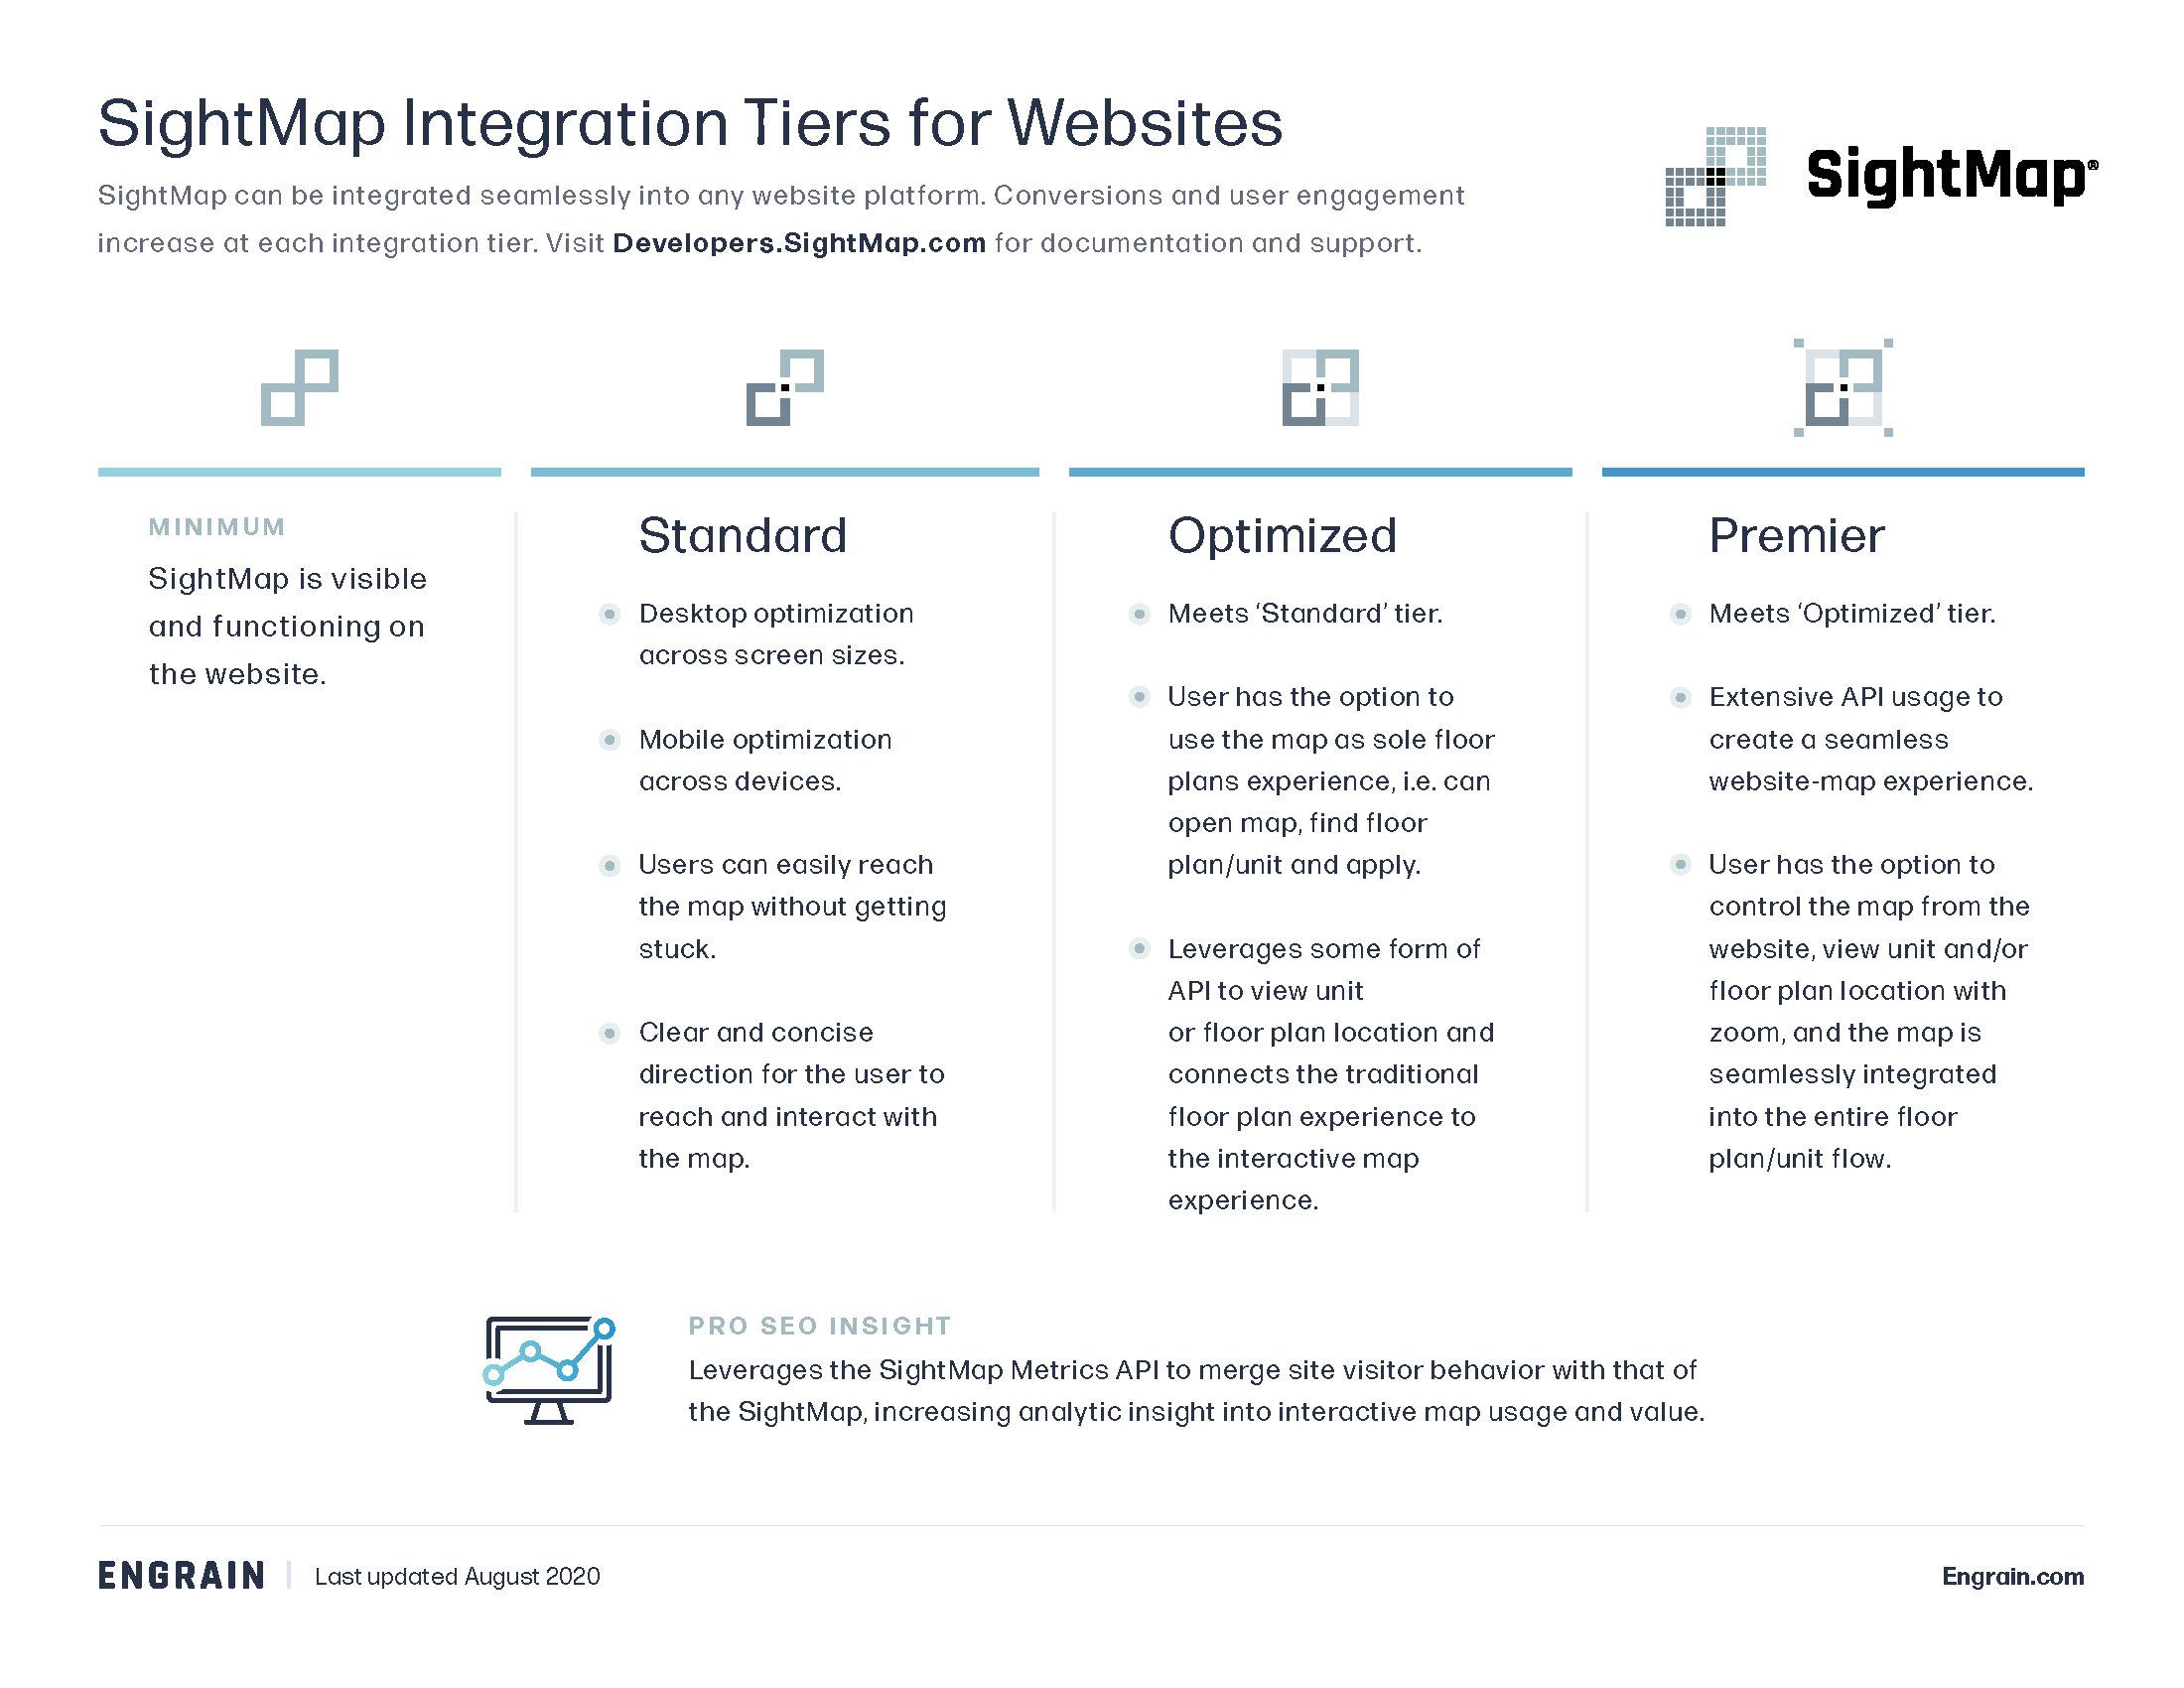 One-sheet version of the Integration Tiers specifics available for download.
[Click to download the guide.](https://engrain.com/wp-content/uploads/2021/01/083120_SightMap_Integration-Tiers-for-Websites_AD.pdf)